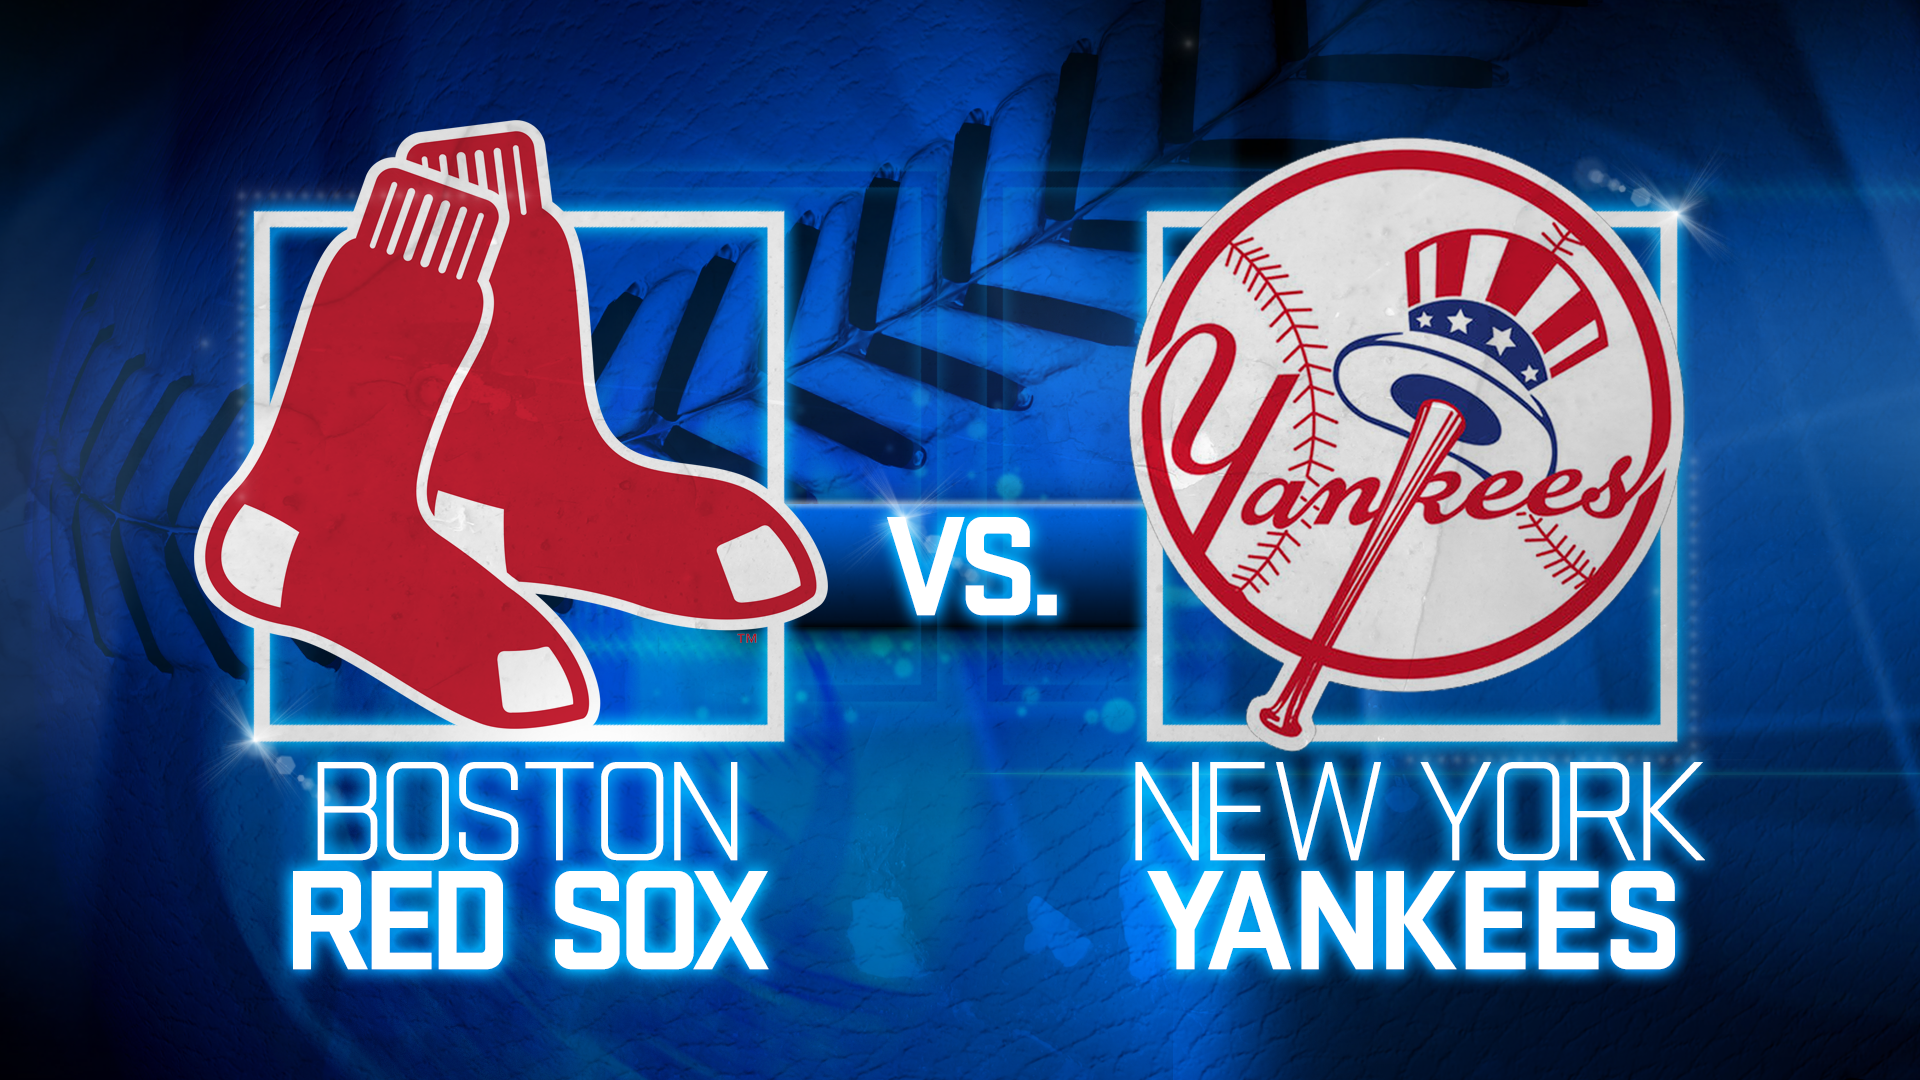 YankeesRed Sox postponed for rain, rescheduled to a Sunday